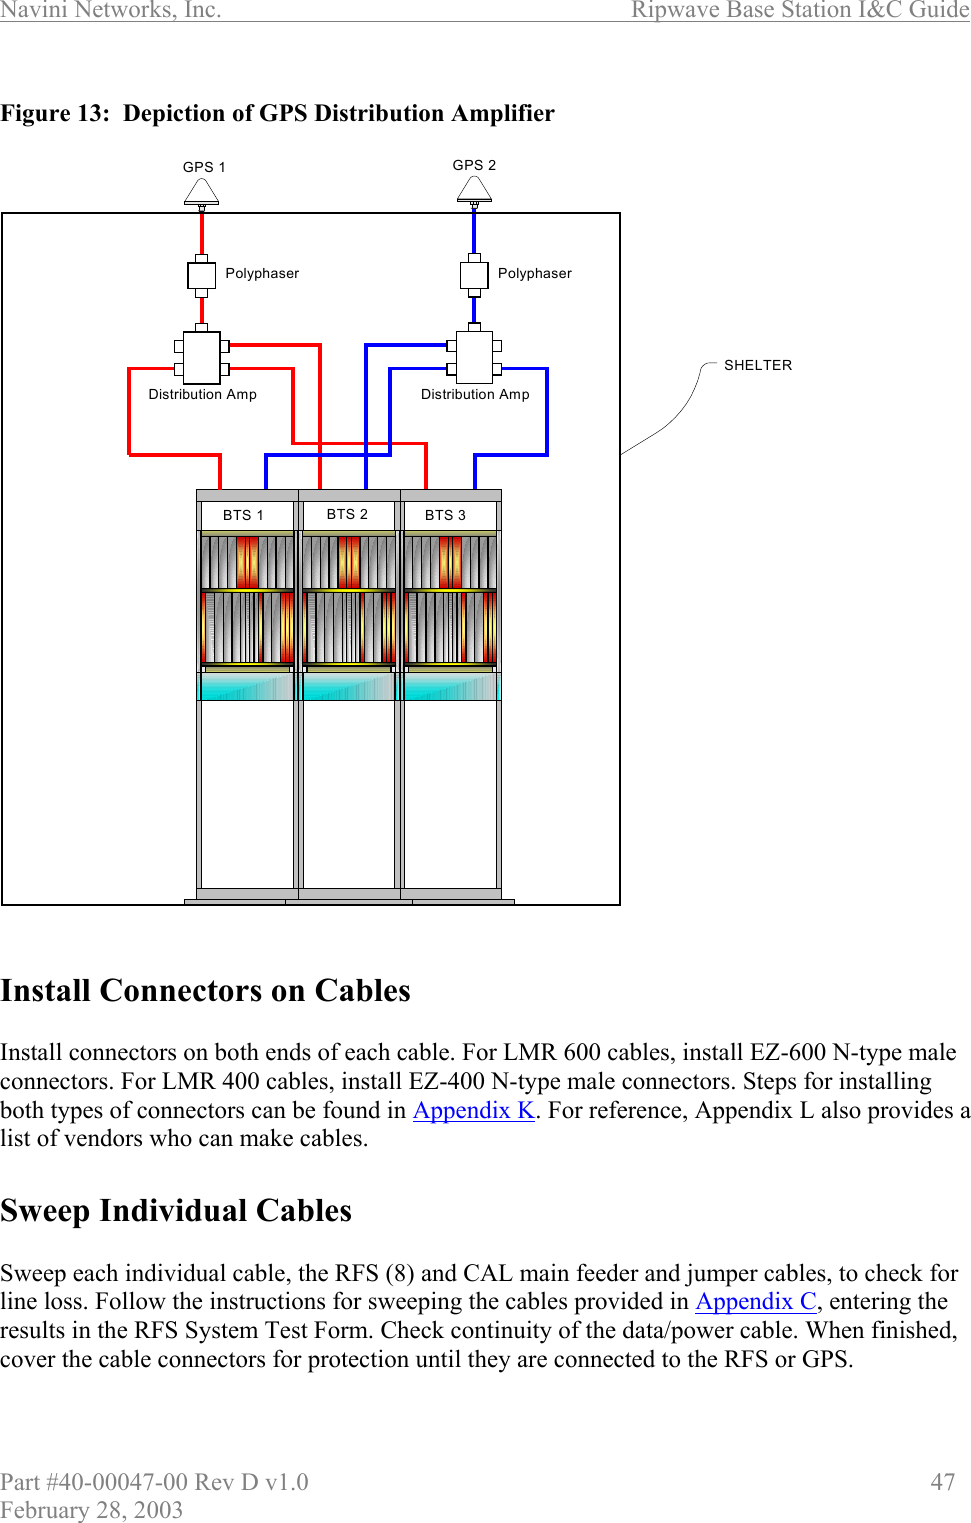 Navini Networks, Inc.                          Ripwave Base Station I&amp;C Guide Part #40-00047-00 Rev D v1.0                     47 February 28, 2003  Figure 13:  Depiction of GPS Distribution Amplifier                              Install Connectors on Cables   Install connectors on both ends of each cable. For LMR 600 cables, install EZ-600 N-type male connectors. For LMR 400 cables, install EZ-400 N-type male connectors. Steps for installing both types of connectors can be found in Appendix K. For reference, Appendix L also provides a list of vendors who can make cables.  Sweep Individual Cables  Sweep each individual cable, the RFS (8) and CAL main feeder and jumper cables, to check for line loss. Follow the instructions for sweeping the cables provided in Appendix C, entering the results in the RFS System Test Form. Check continuity of the data/power cable. When finished, cover the cable connectors for protection until they are connected to the RFS or GPS.  GPS 1PolyphaserDistribution AmpGPS 2PolyphaserDistribution AmpBTS 1 BTS 2 BTS 3SHELTER